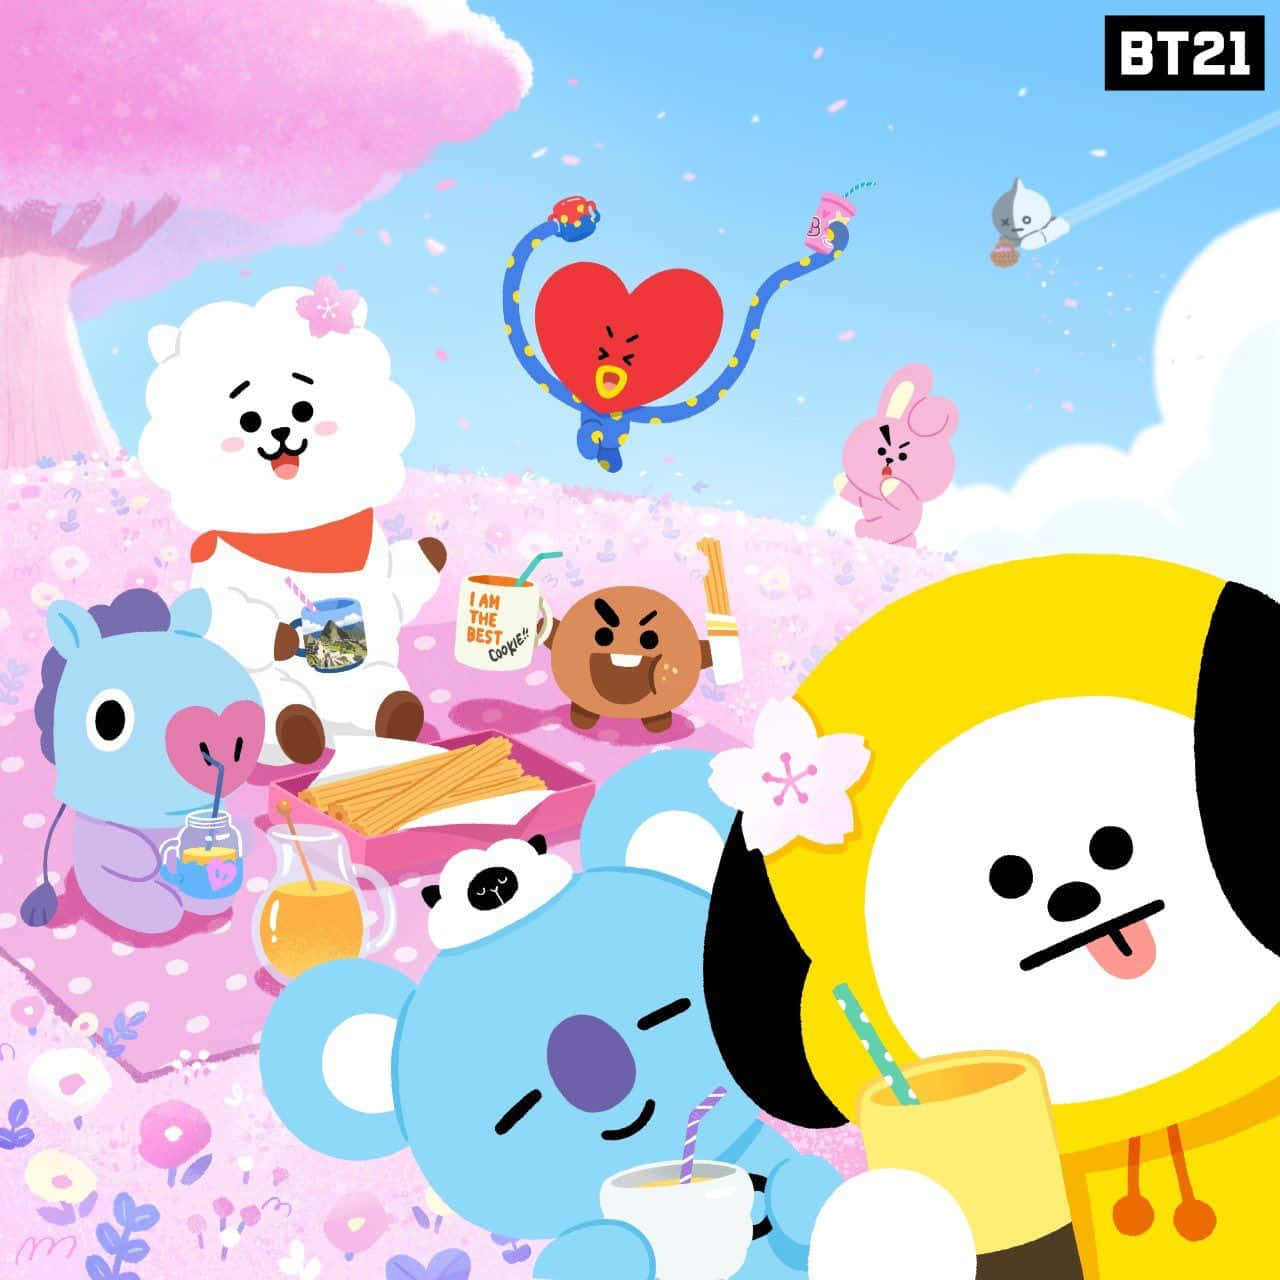 A funky family portrait of BT21